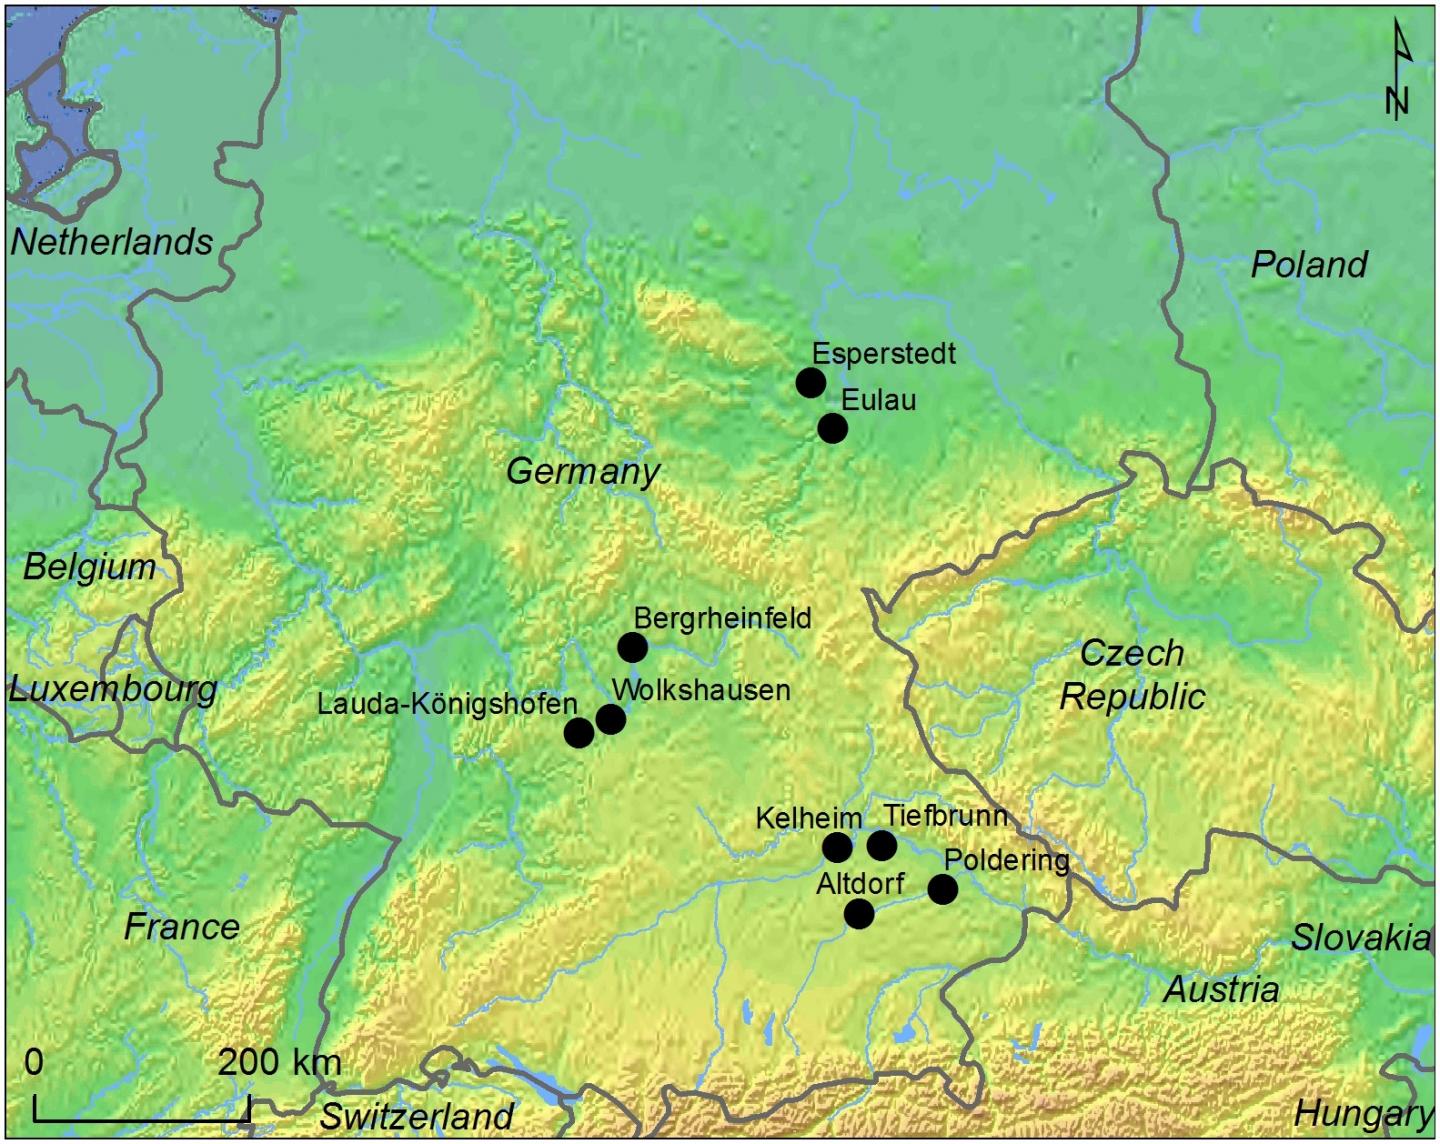 Women in Southern Germany Corded Ware Culture May Have Been Highly Mobile